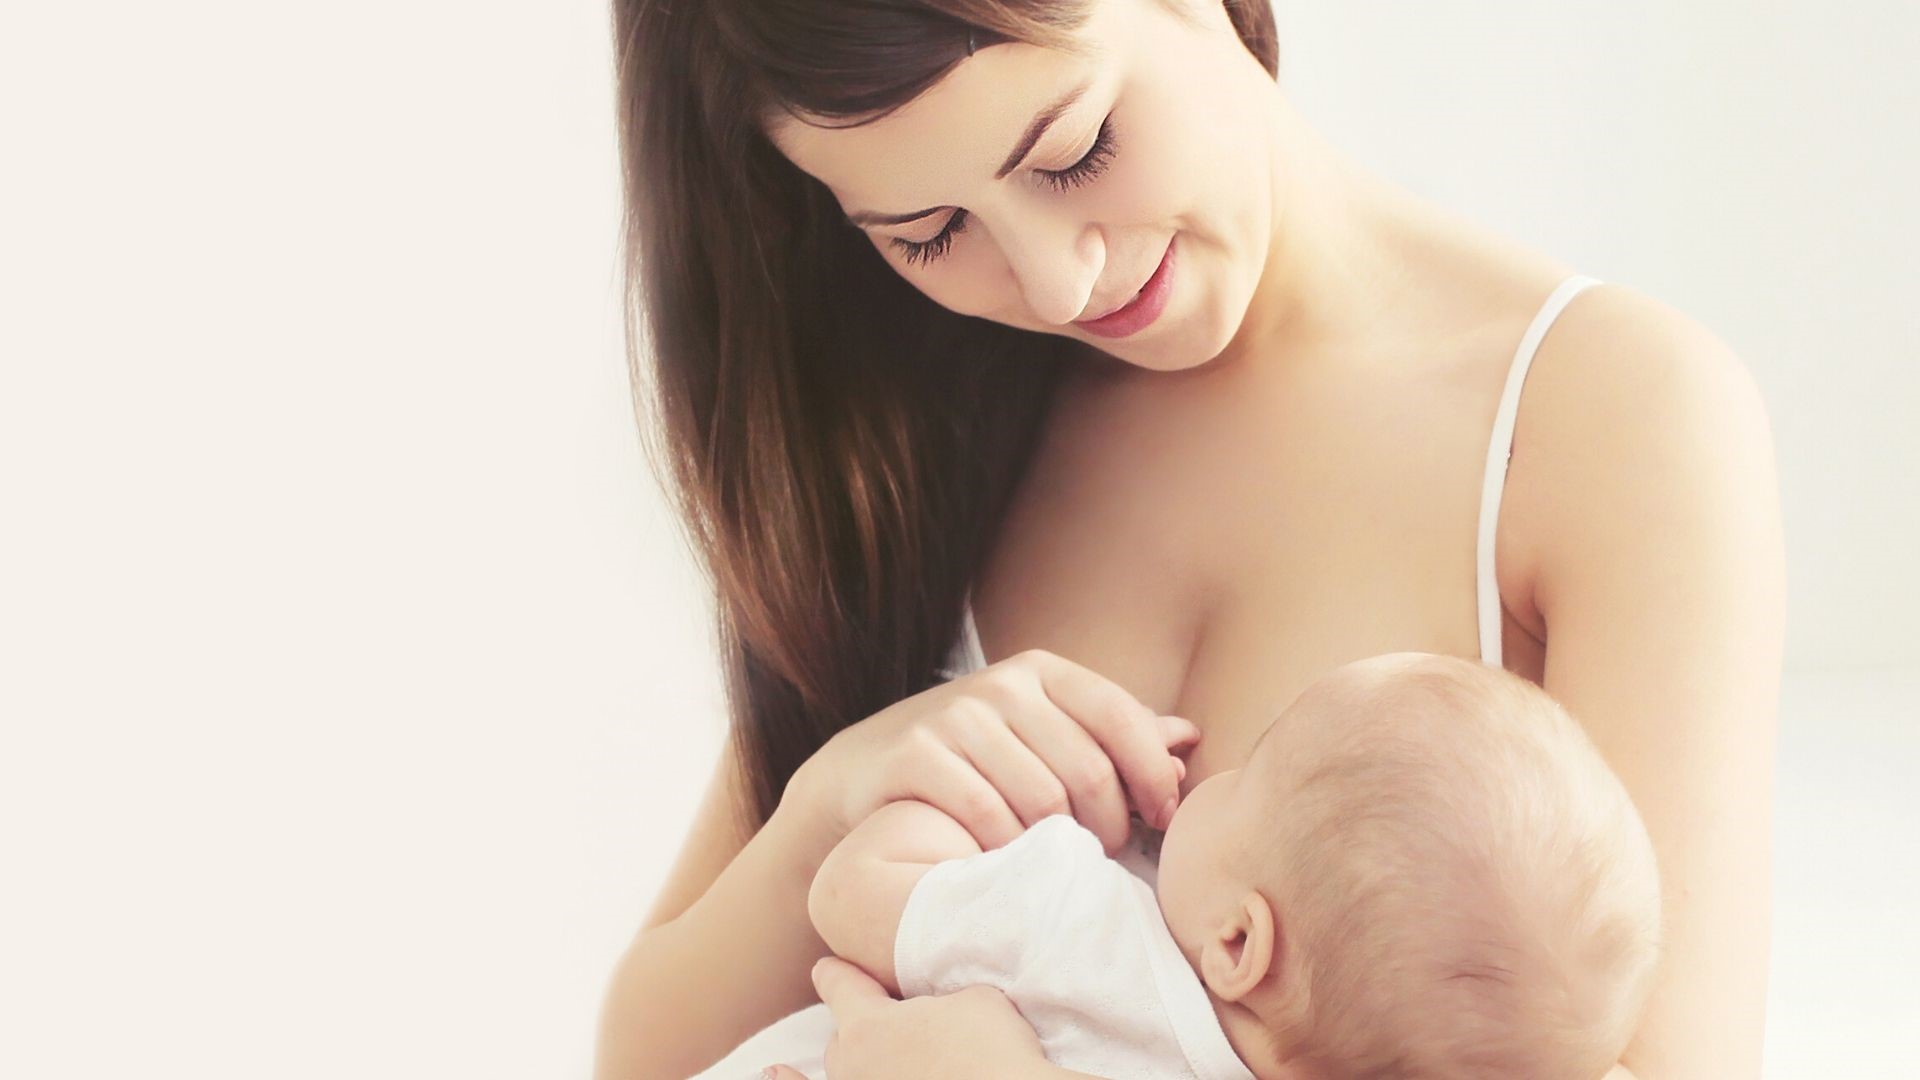 Breastfeeding: Benefits, Considerations, How to, Supplies